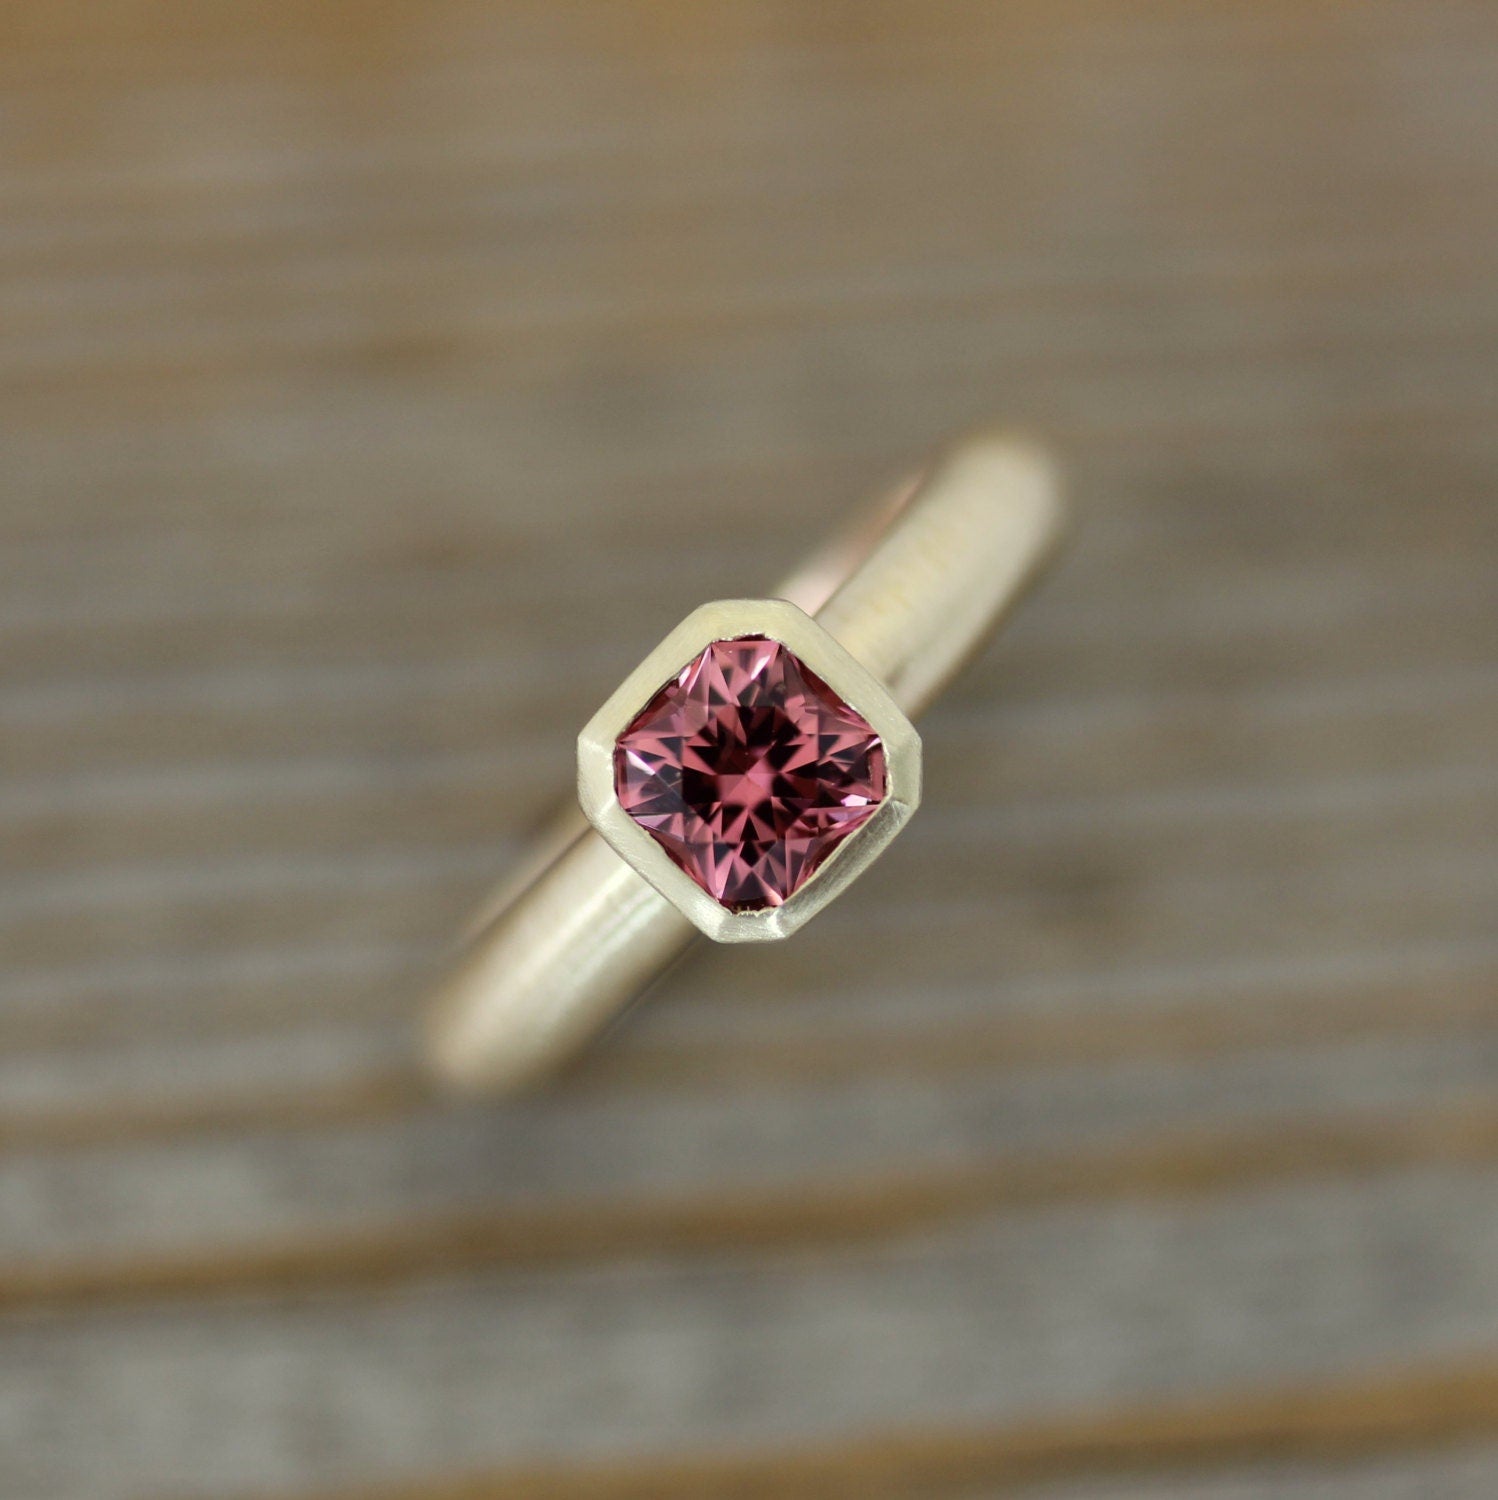 A handmade Asscher Cut Pink Spinel Ring in 14k Yellow Gold with a pink sapphire in the center.